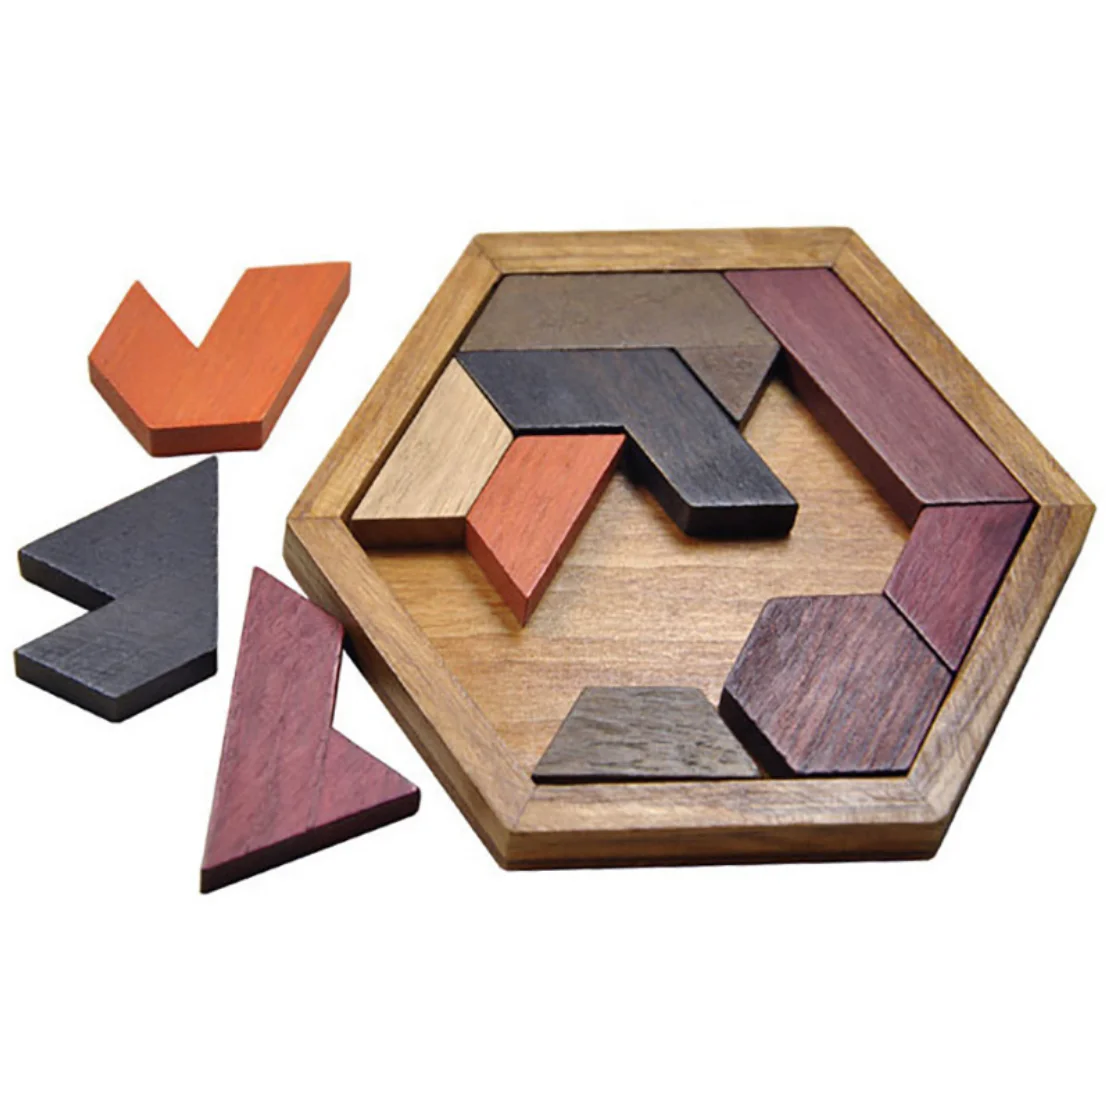 Coogam Wooden Tangram Puzzle Pattern Blocks Brain Teasers Game with 60 Challenges 3D Russian Building Toy Wood Shape Jigsaw Puzzles Montessori STEM Educational Toys Gift for Kids Adults 